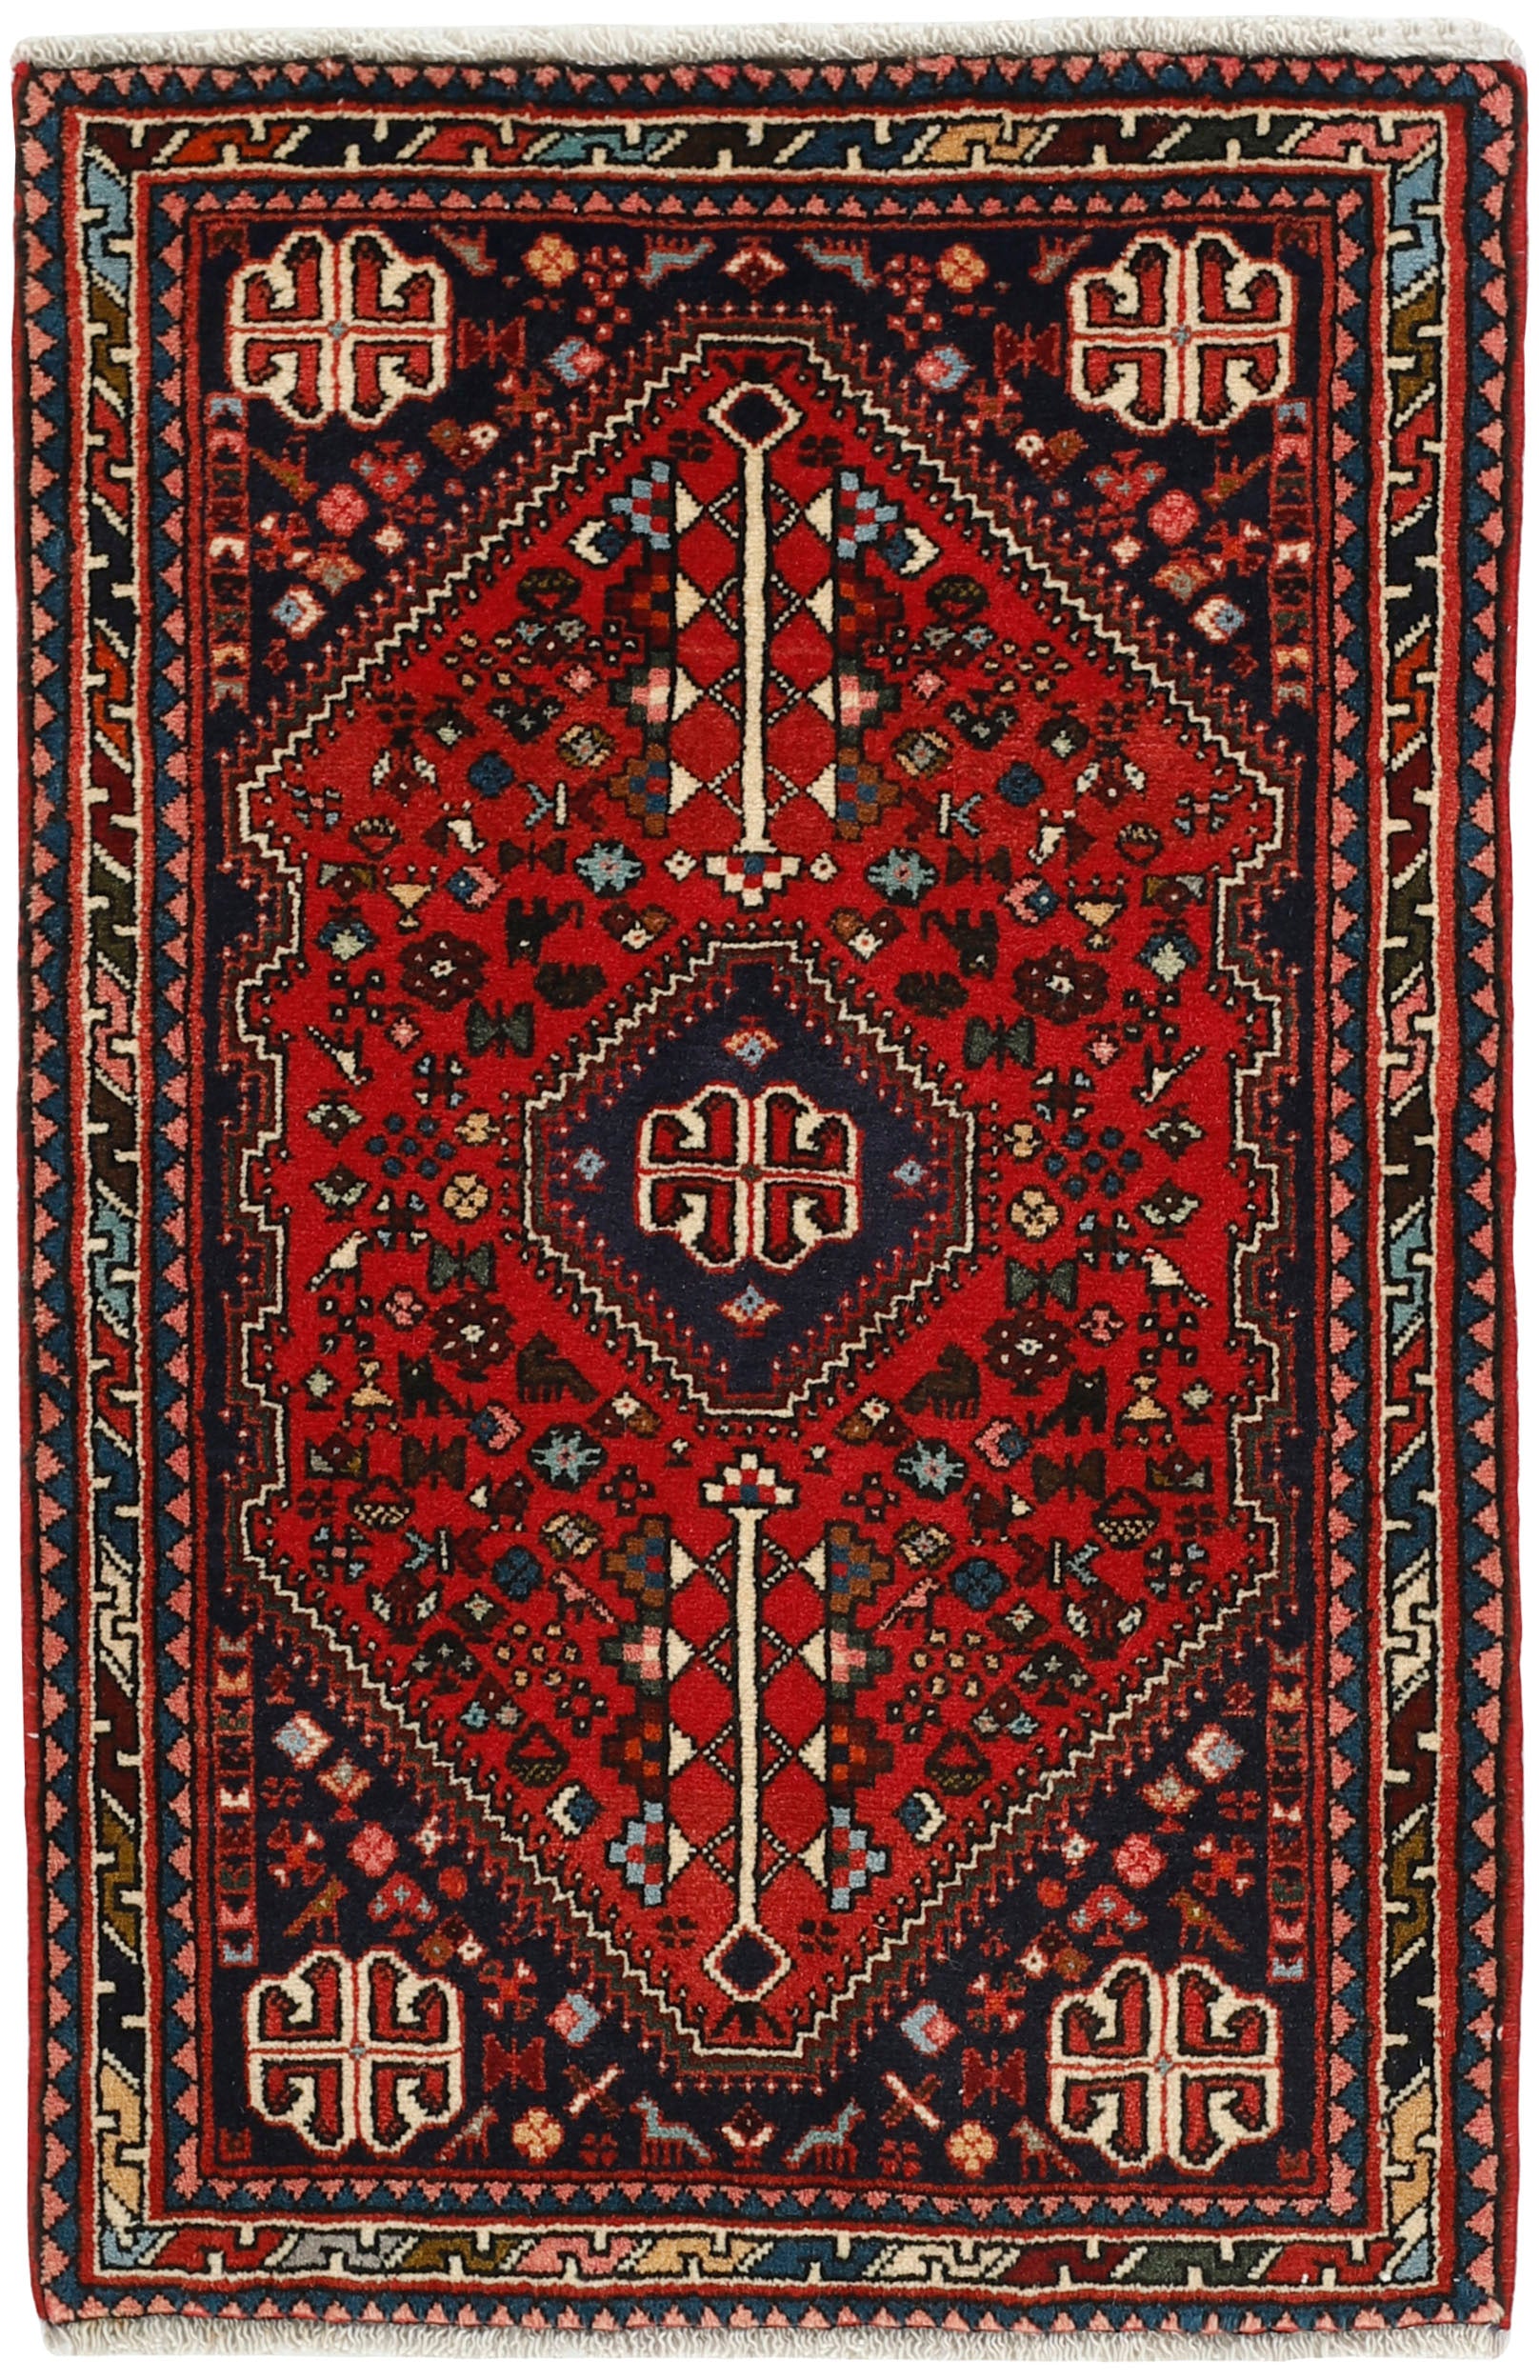 Authentic persian rug with traditional tribal geometric design in red